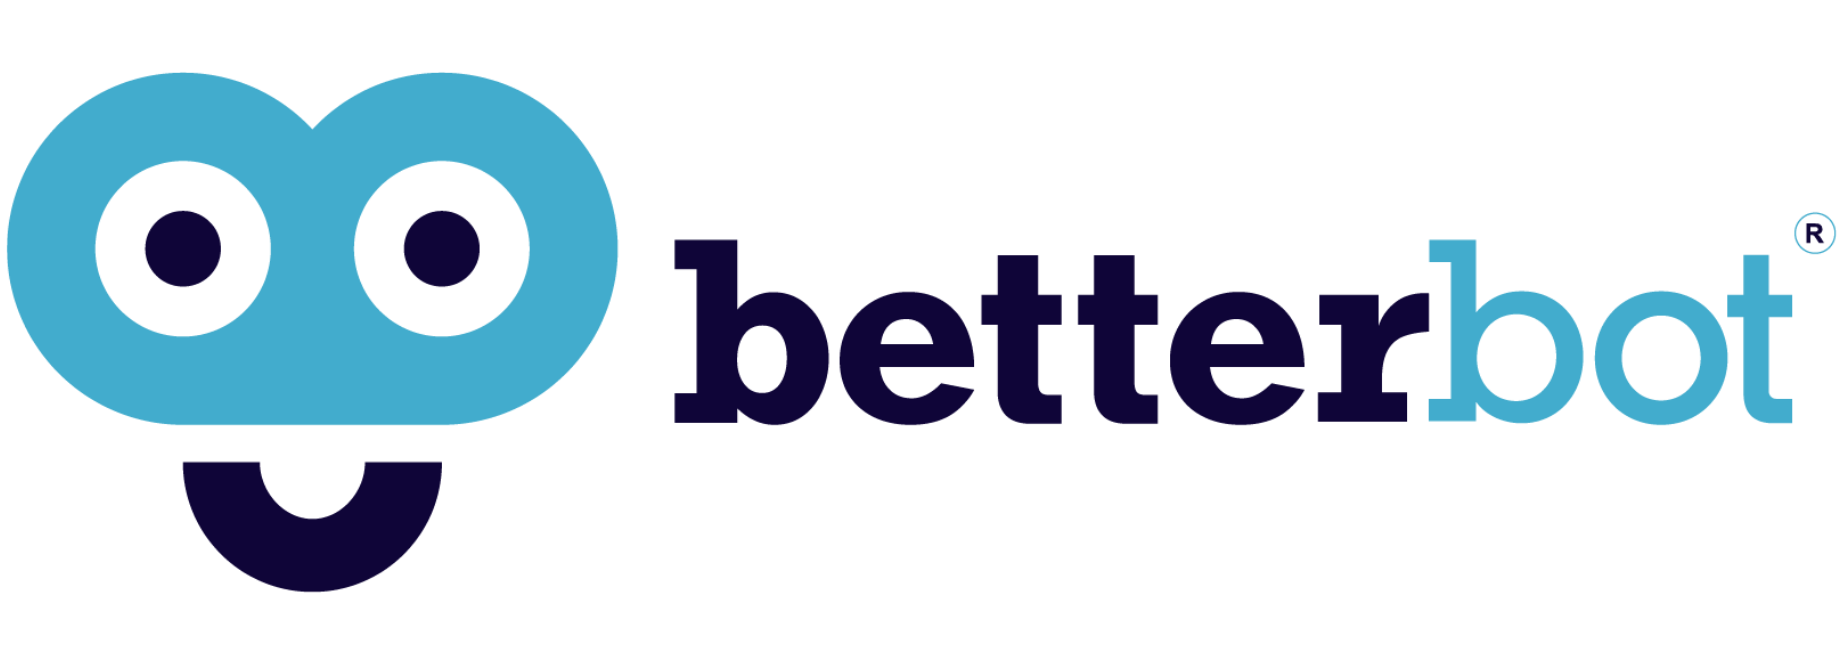 BetterBot Logo_Cropped